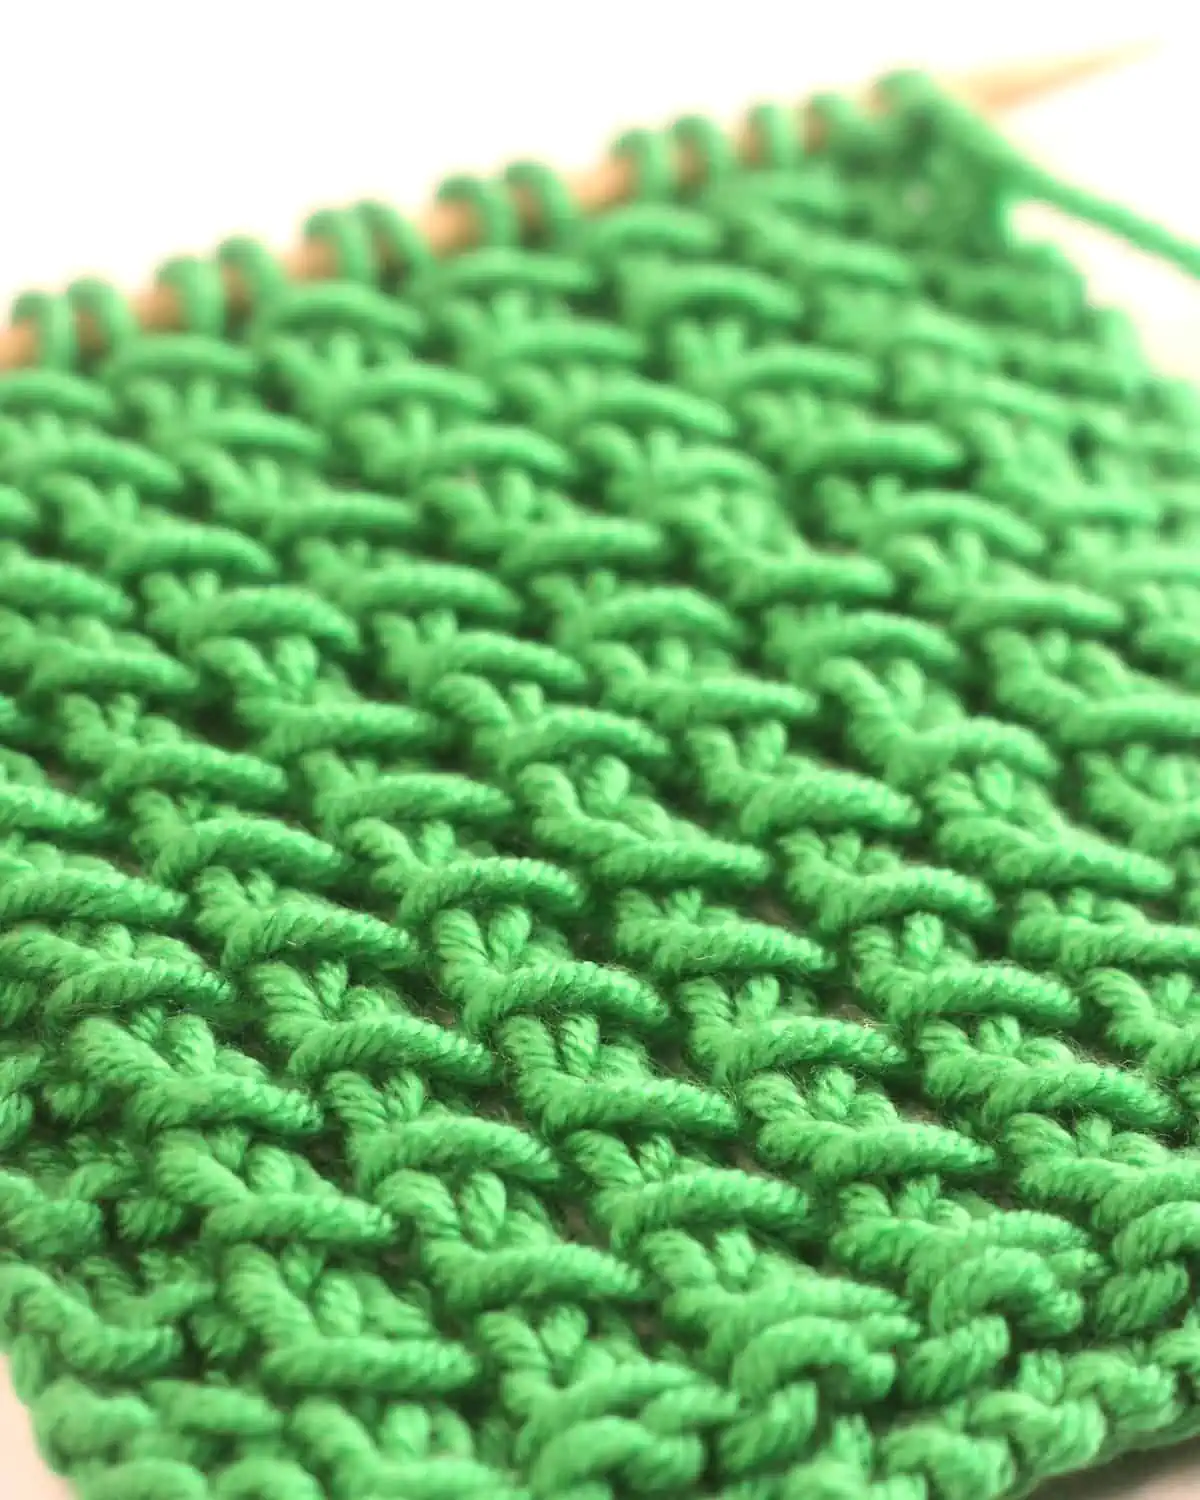 Close-up of the Bamboo Stitch texture knitted with green colored yarn on wooden needle.